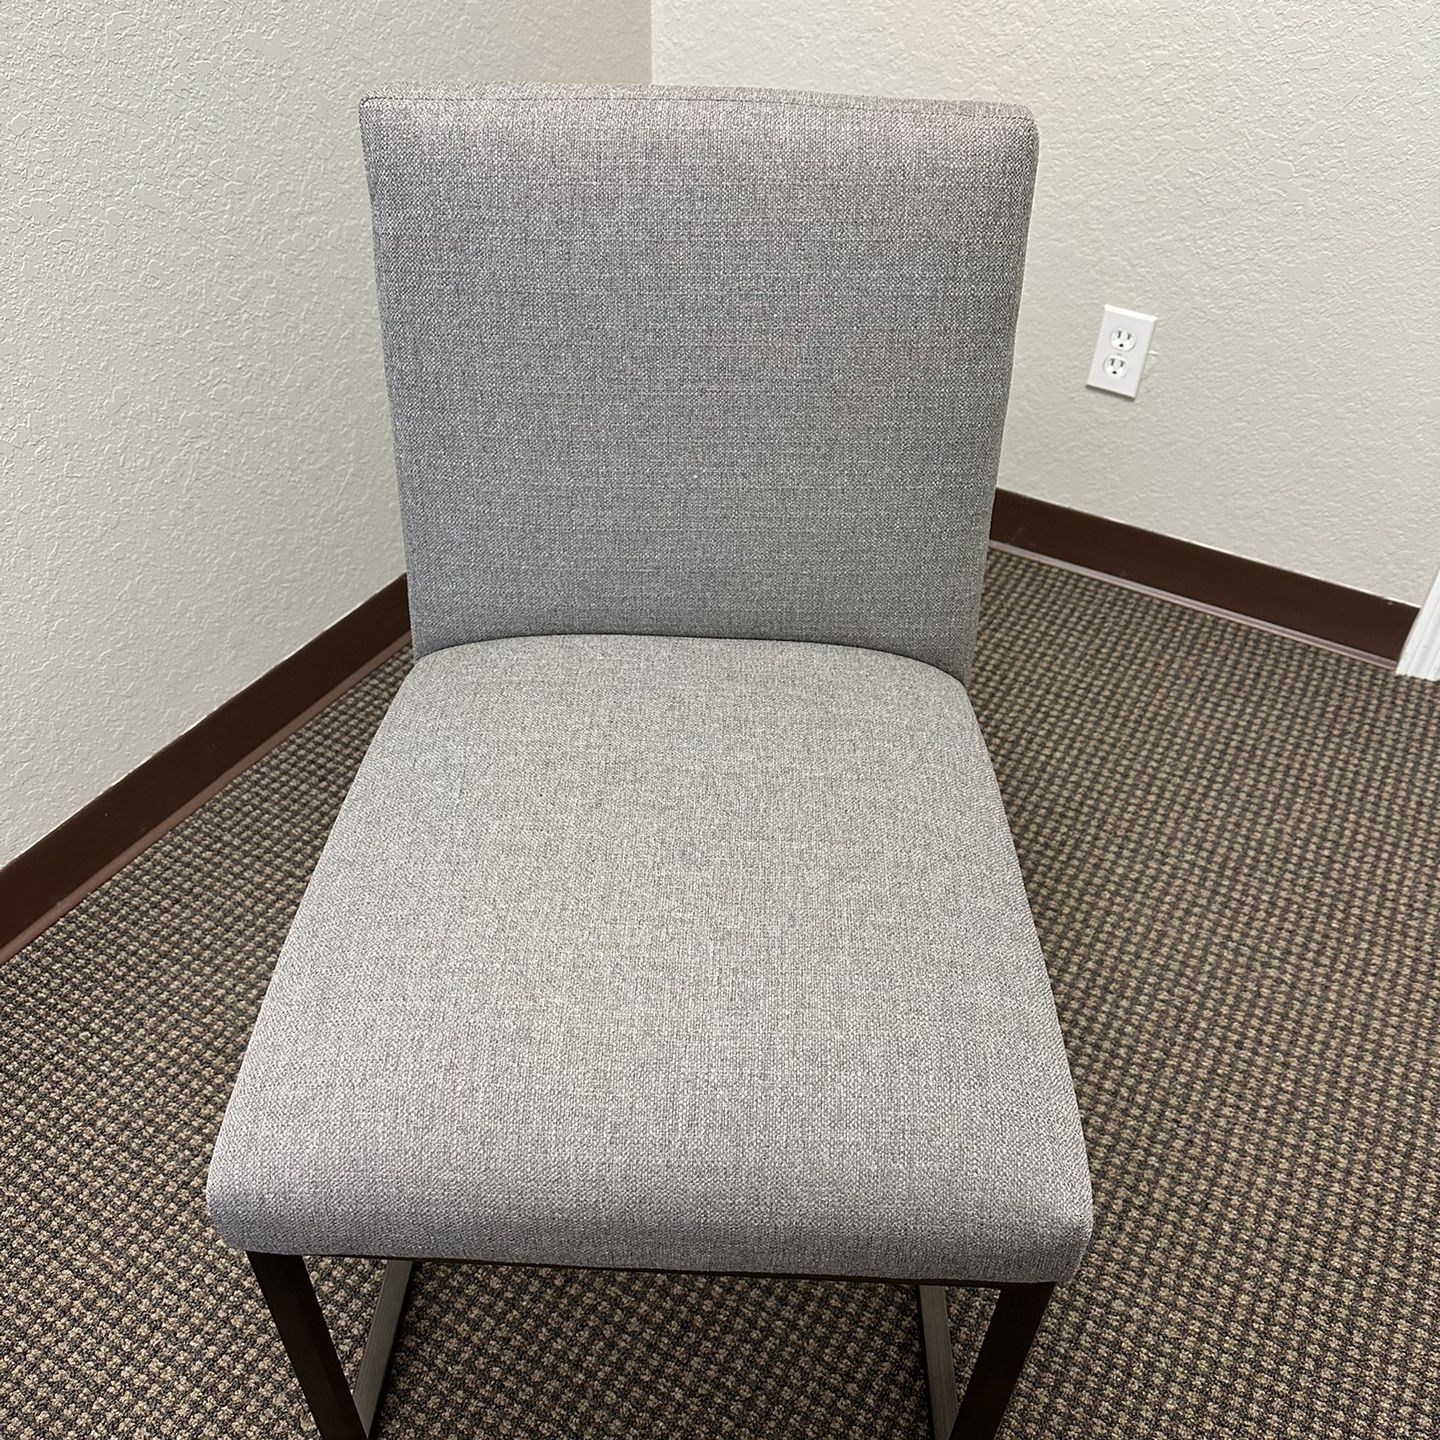 MAKE AN OFFER WE ARE FLEXIBLE IN PRICE Cooper Side Chair, UNIVERSAL FURNITURE,  MAKE YOUR BEST OFFER 